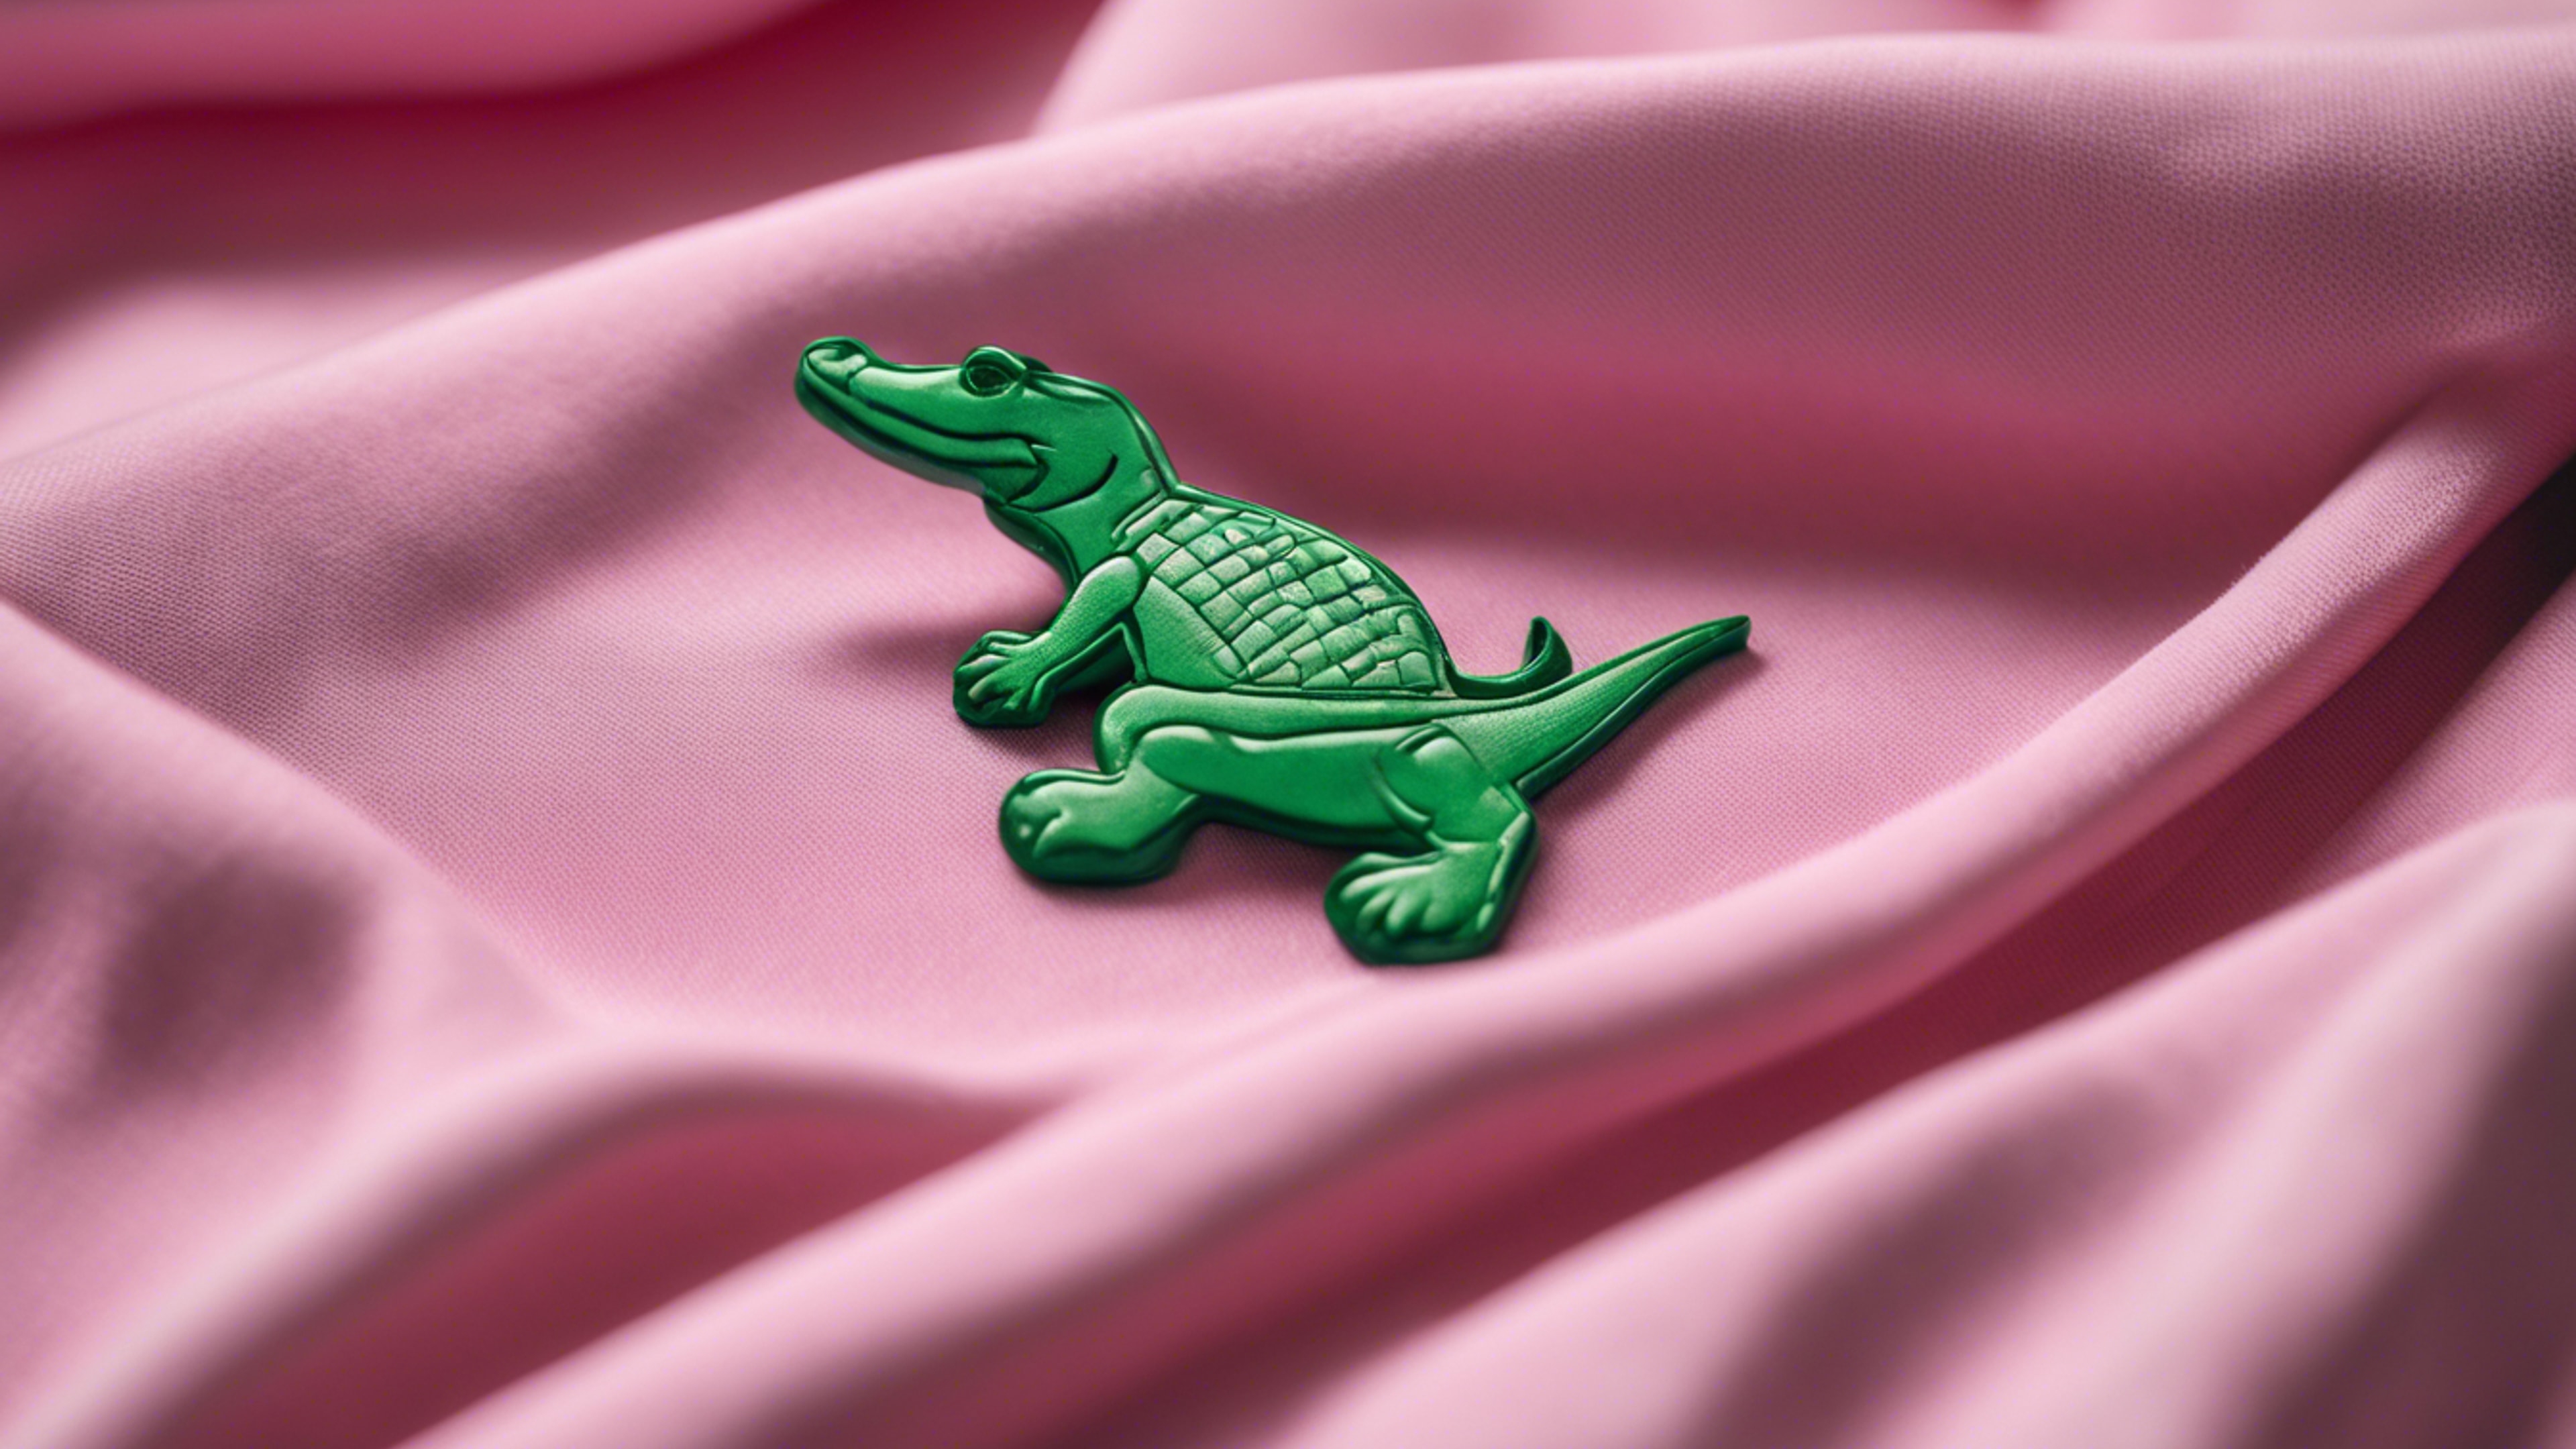 A pink polo shirt with a green alligator logo, folded neatly on a bed. Tapeet[63d9ff960abf421e89a8]